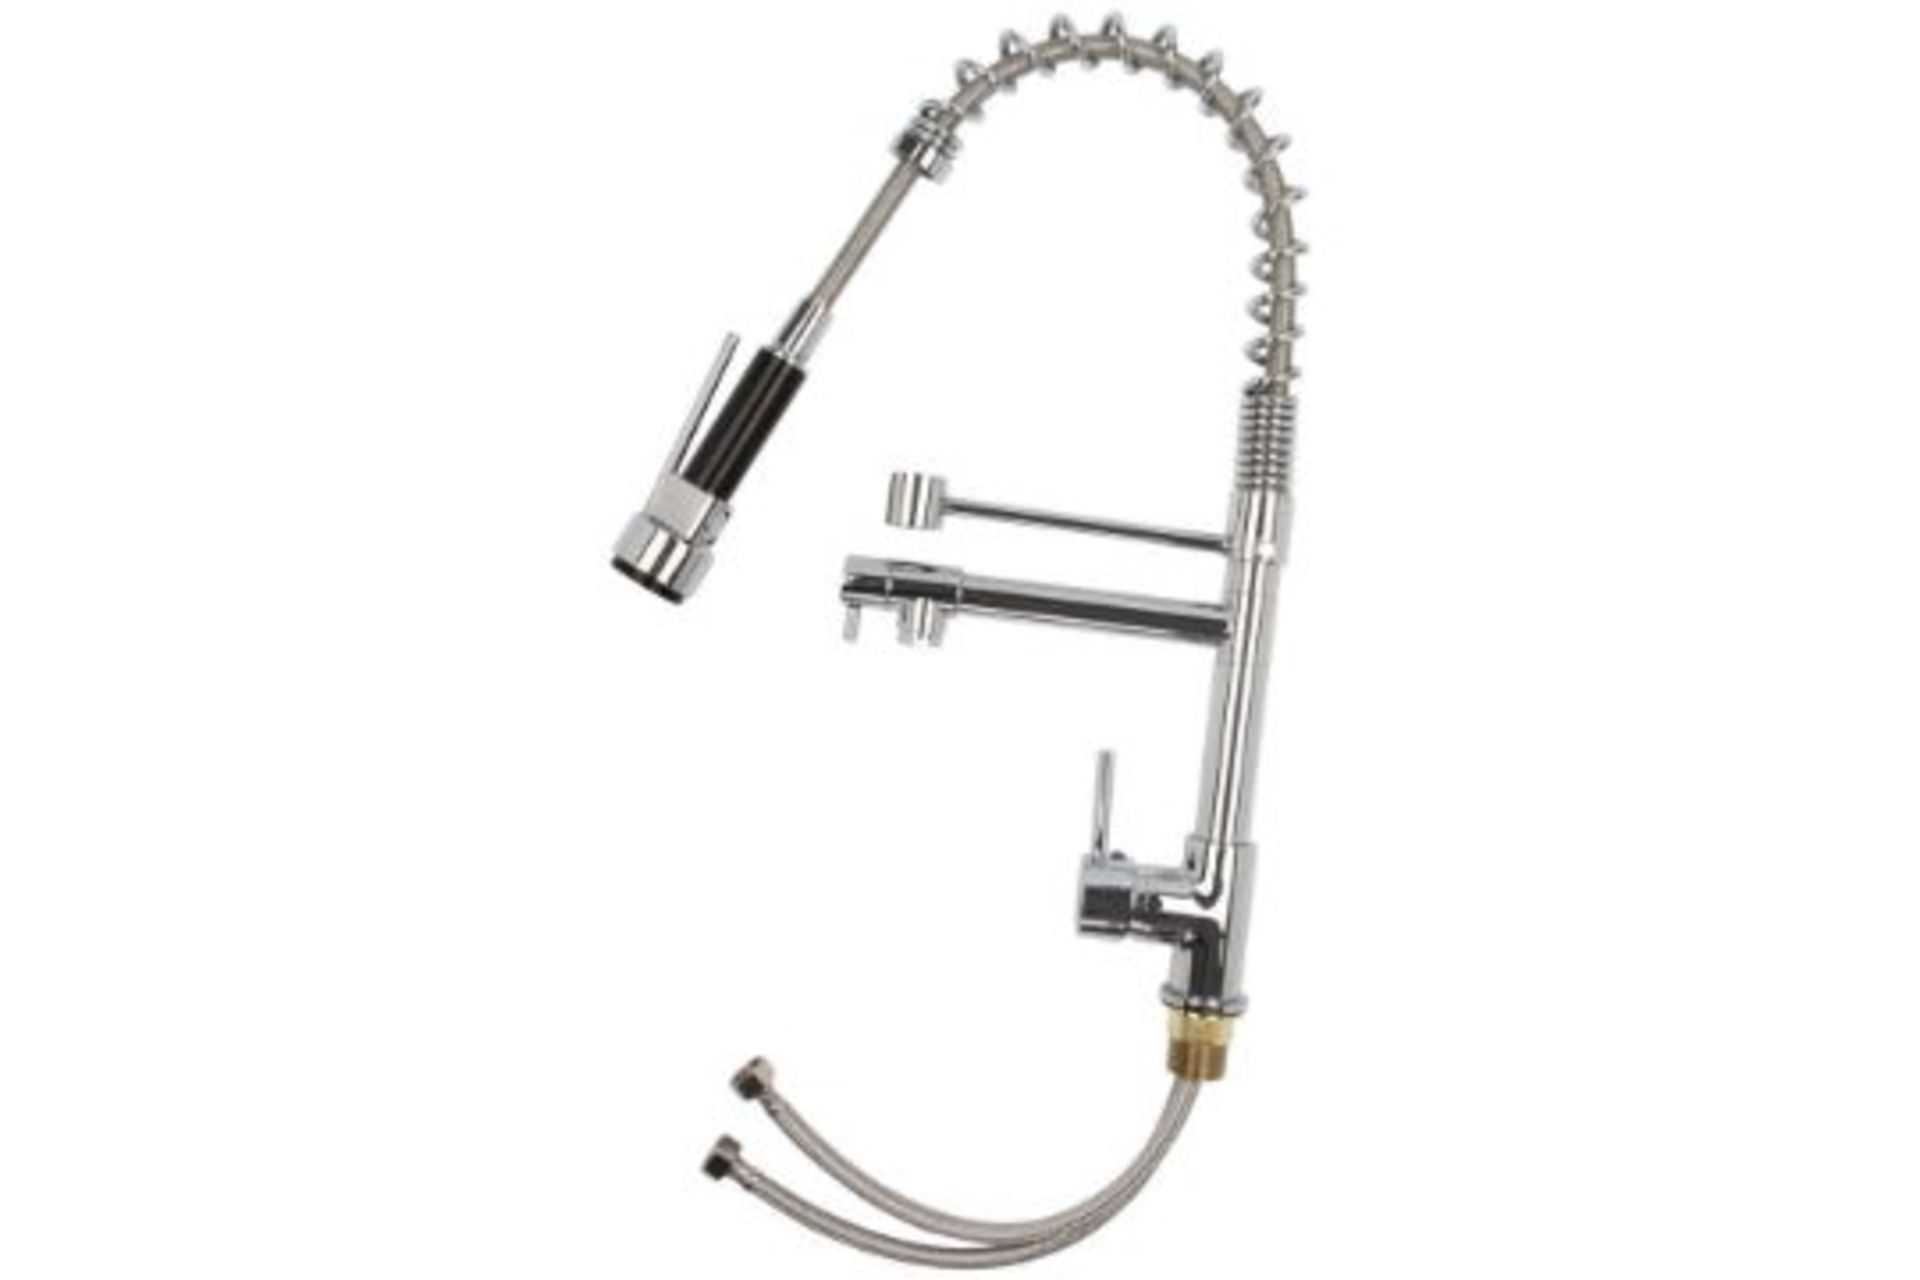 NEW & BOXED Bentley Modern Monobloc Chrome Brass Pull Out Spray Mixer Tap.RRP £349.99.This tap is - Image 2 of 2